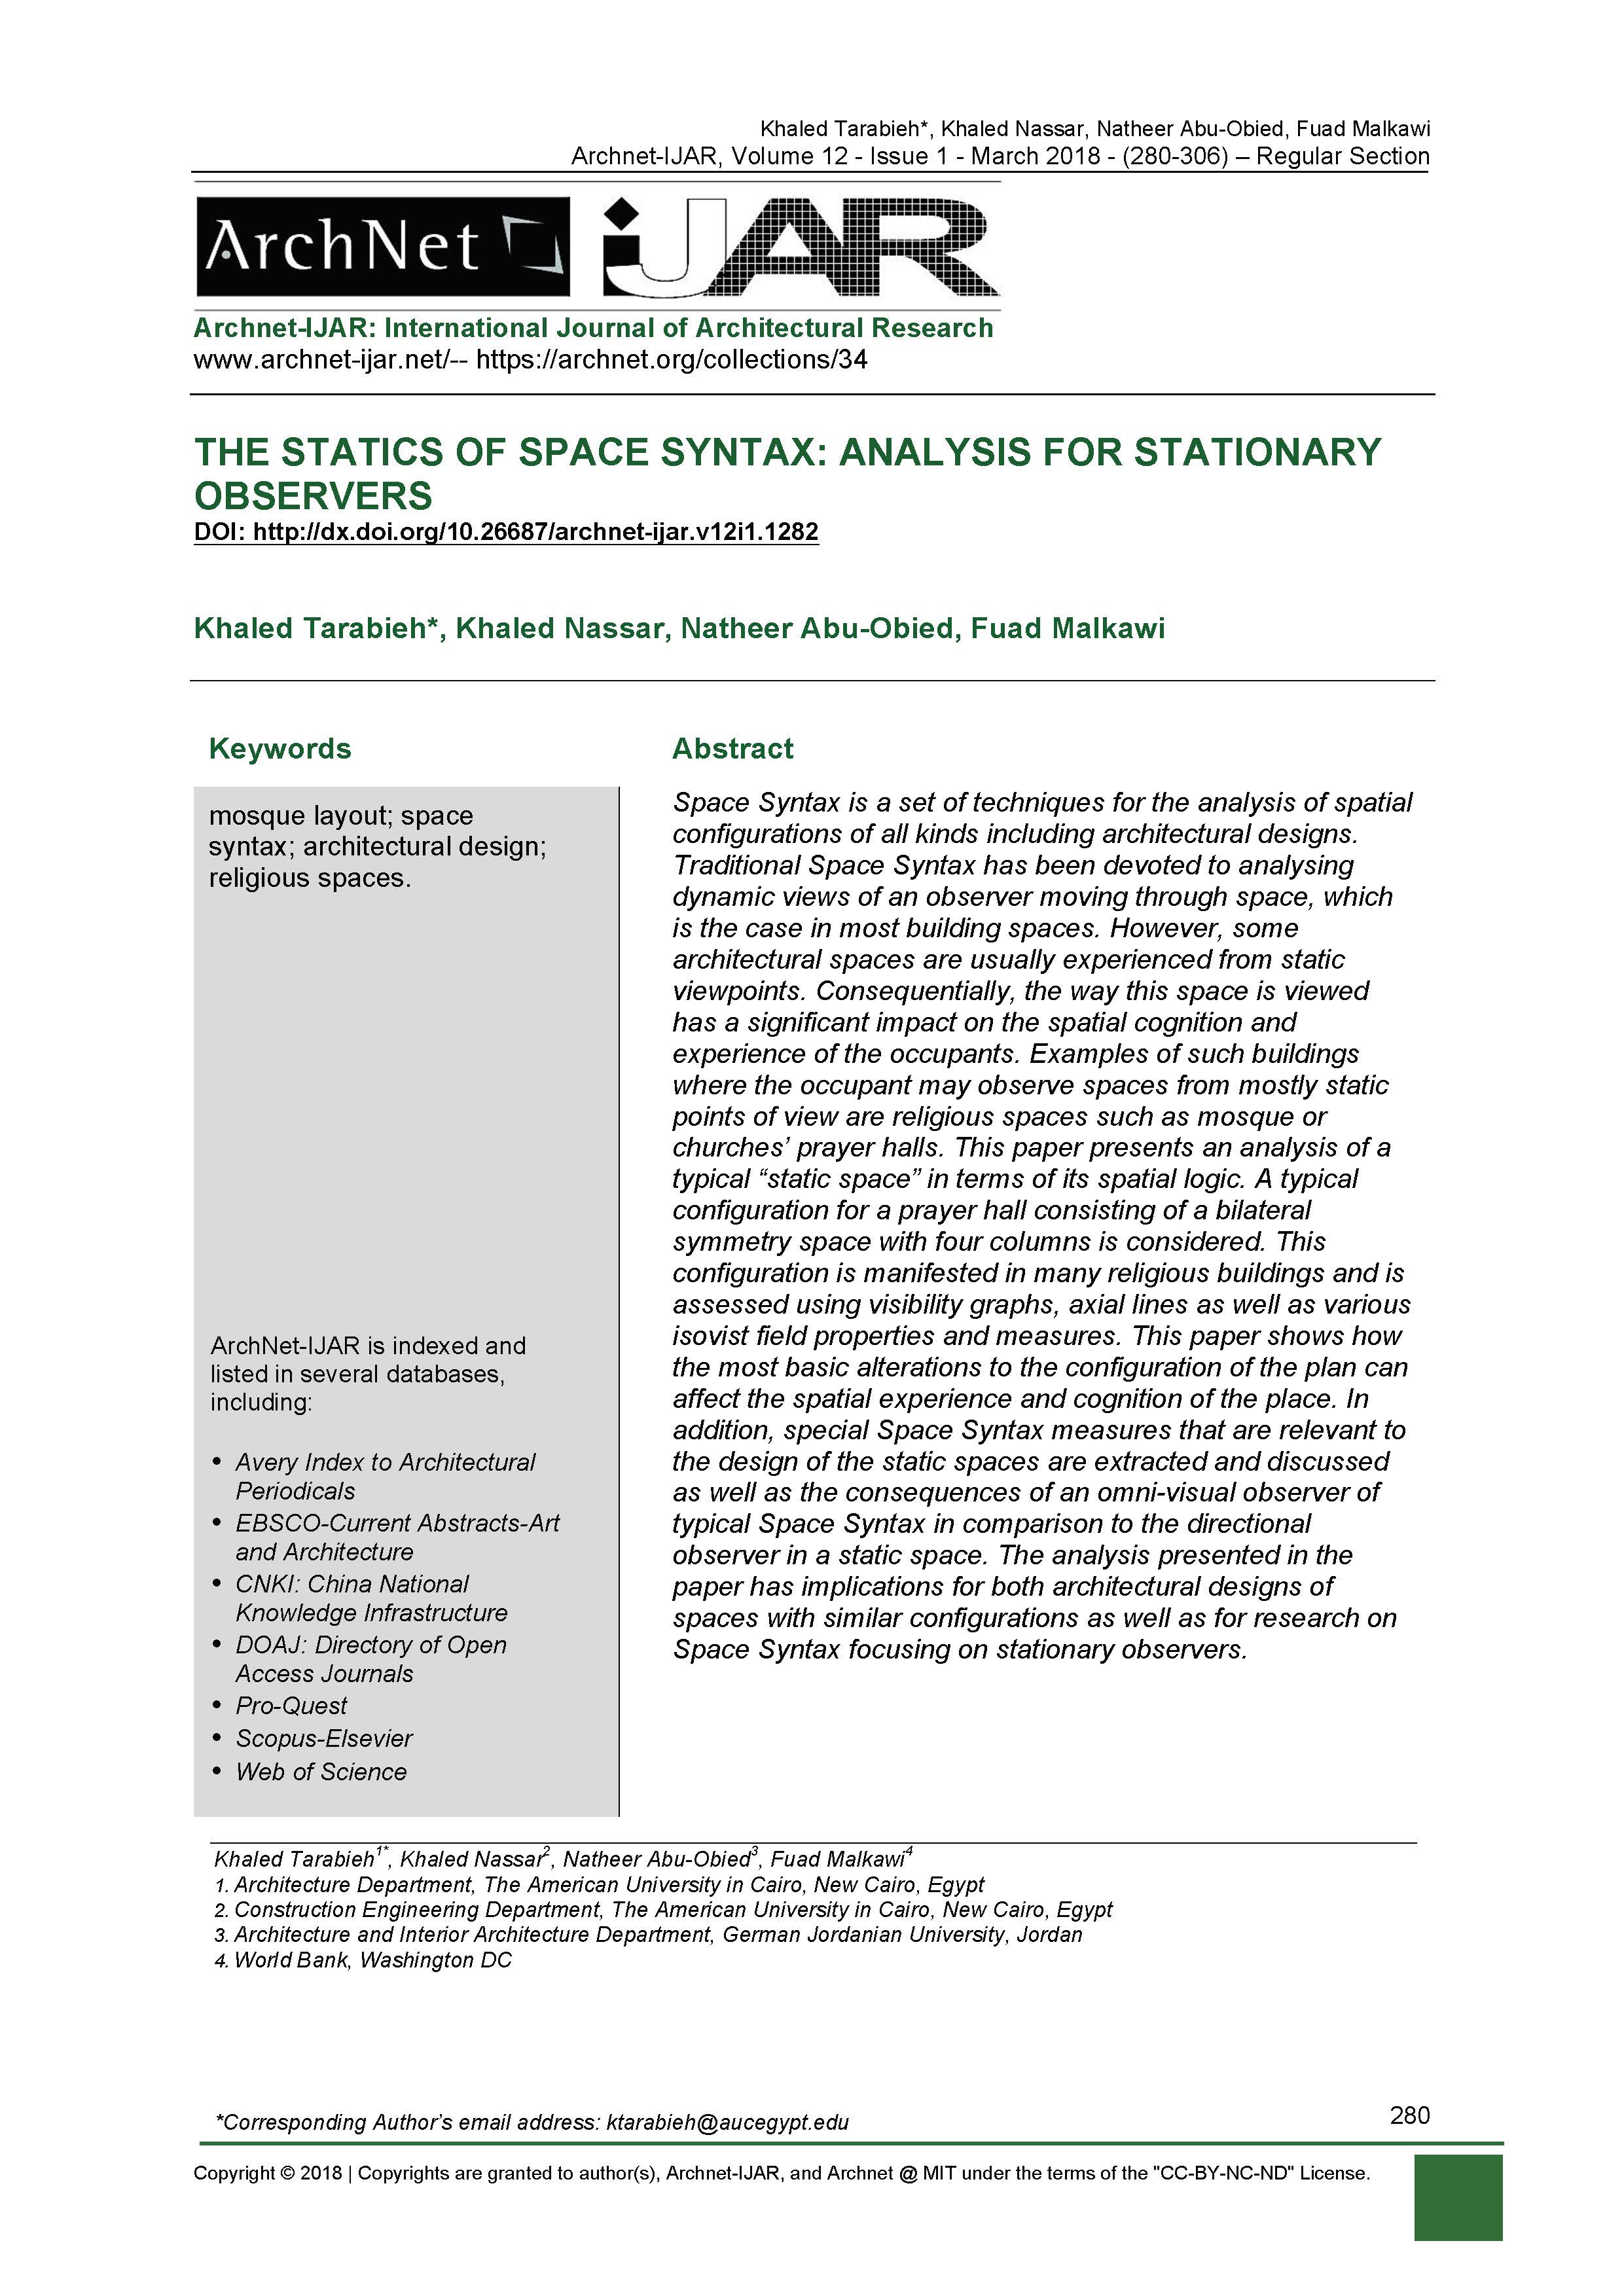 The Statics of Space Syntax: Analysis for Stationary Observers